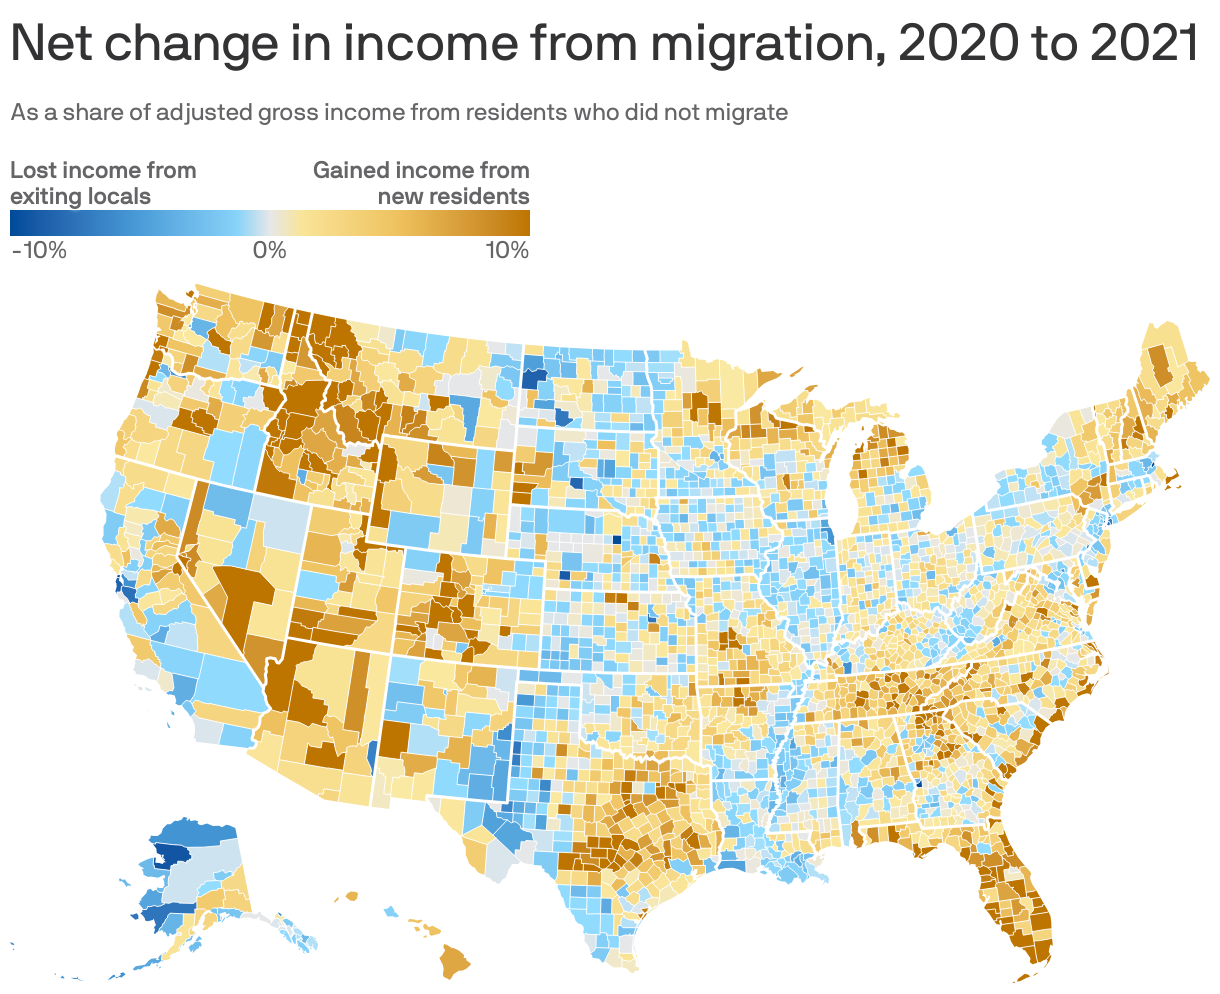 Net change in income from migration, 2020 to 2021